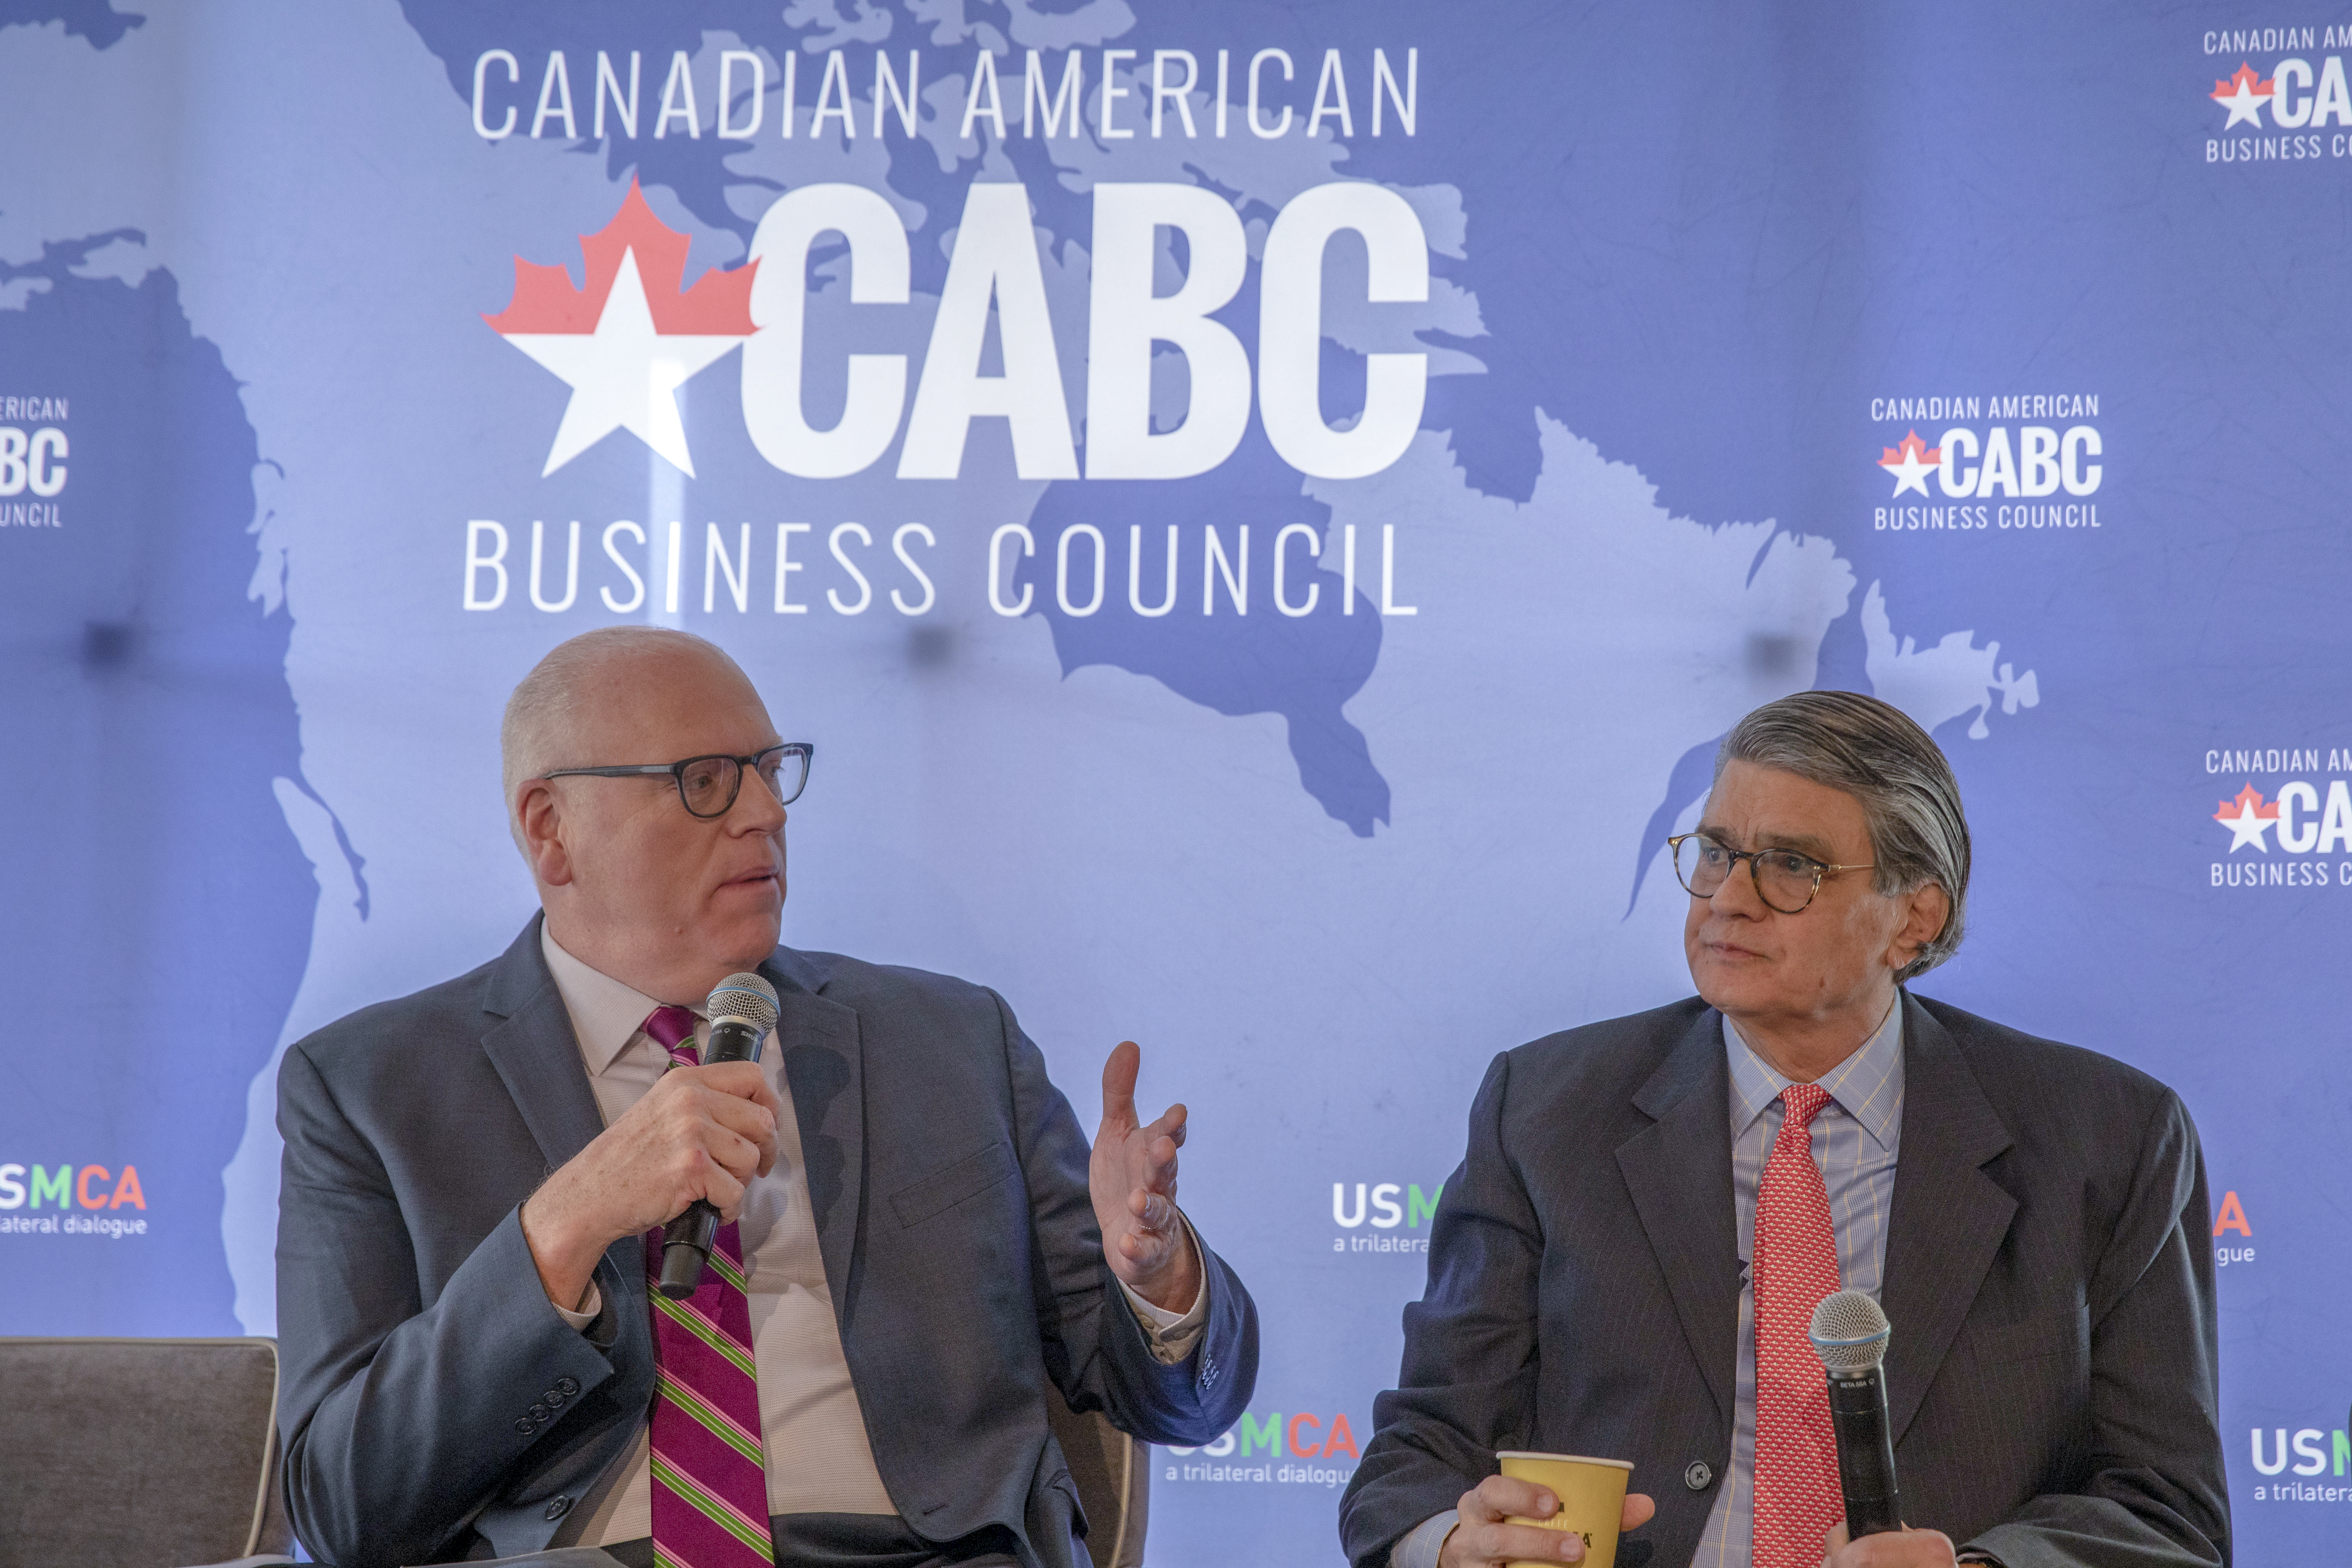 Joe Crowley; former congressman and Don Johnson; former congressman talk about Why Trade Matters during the Prospects for USMCA Ratification Trilateral Dialogue on February 21, 2019 in Washington, DC. (Tasos Katopodis/Getty Images for CABC)